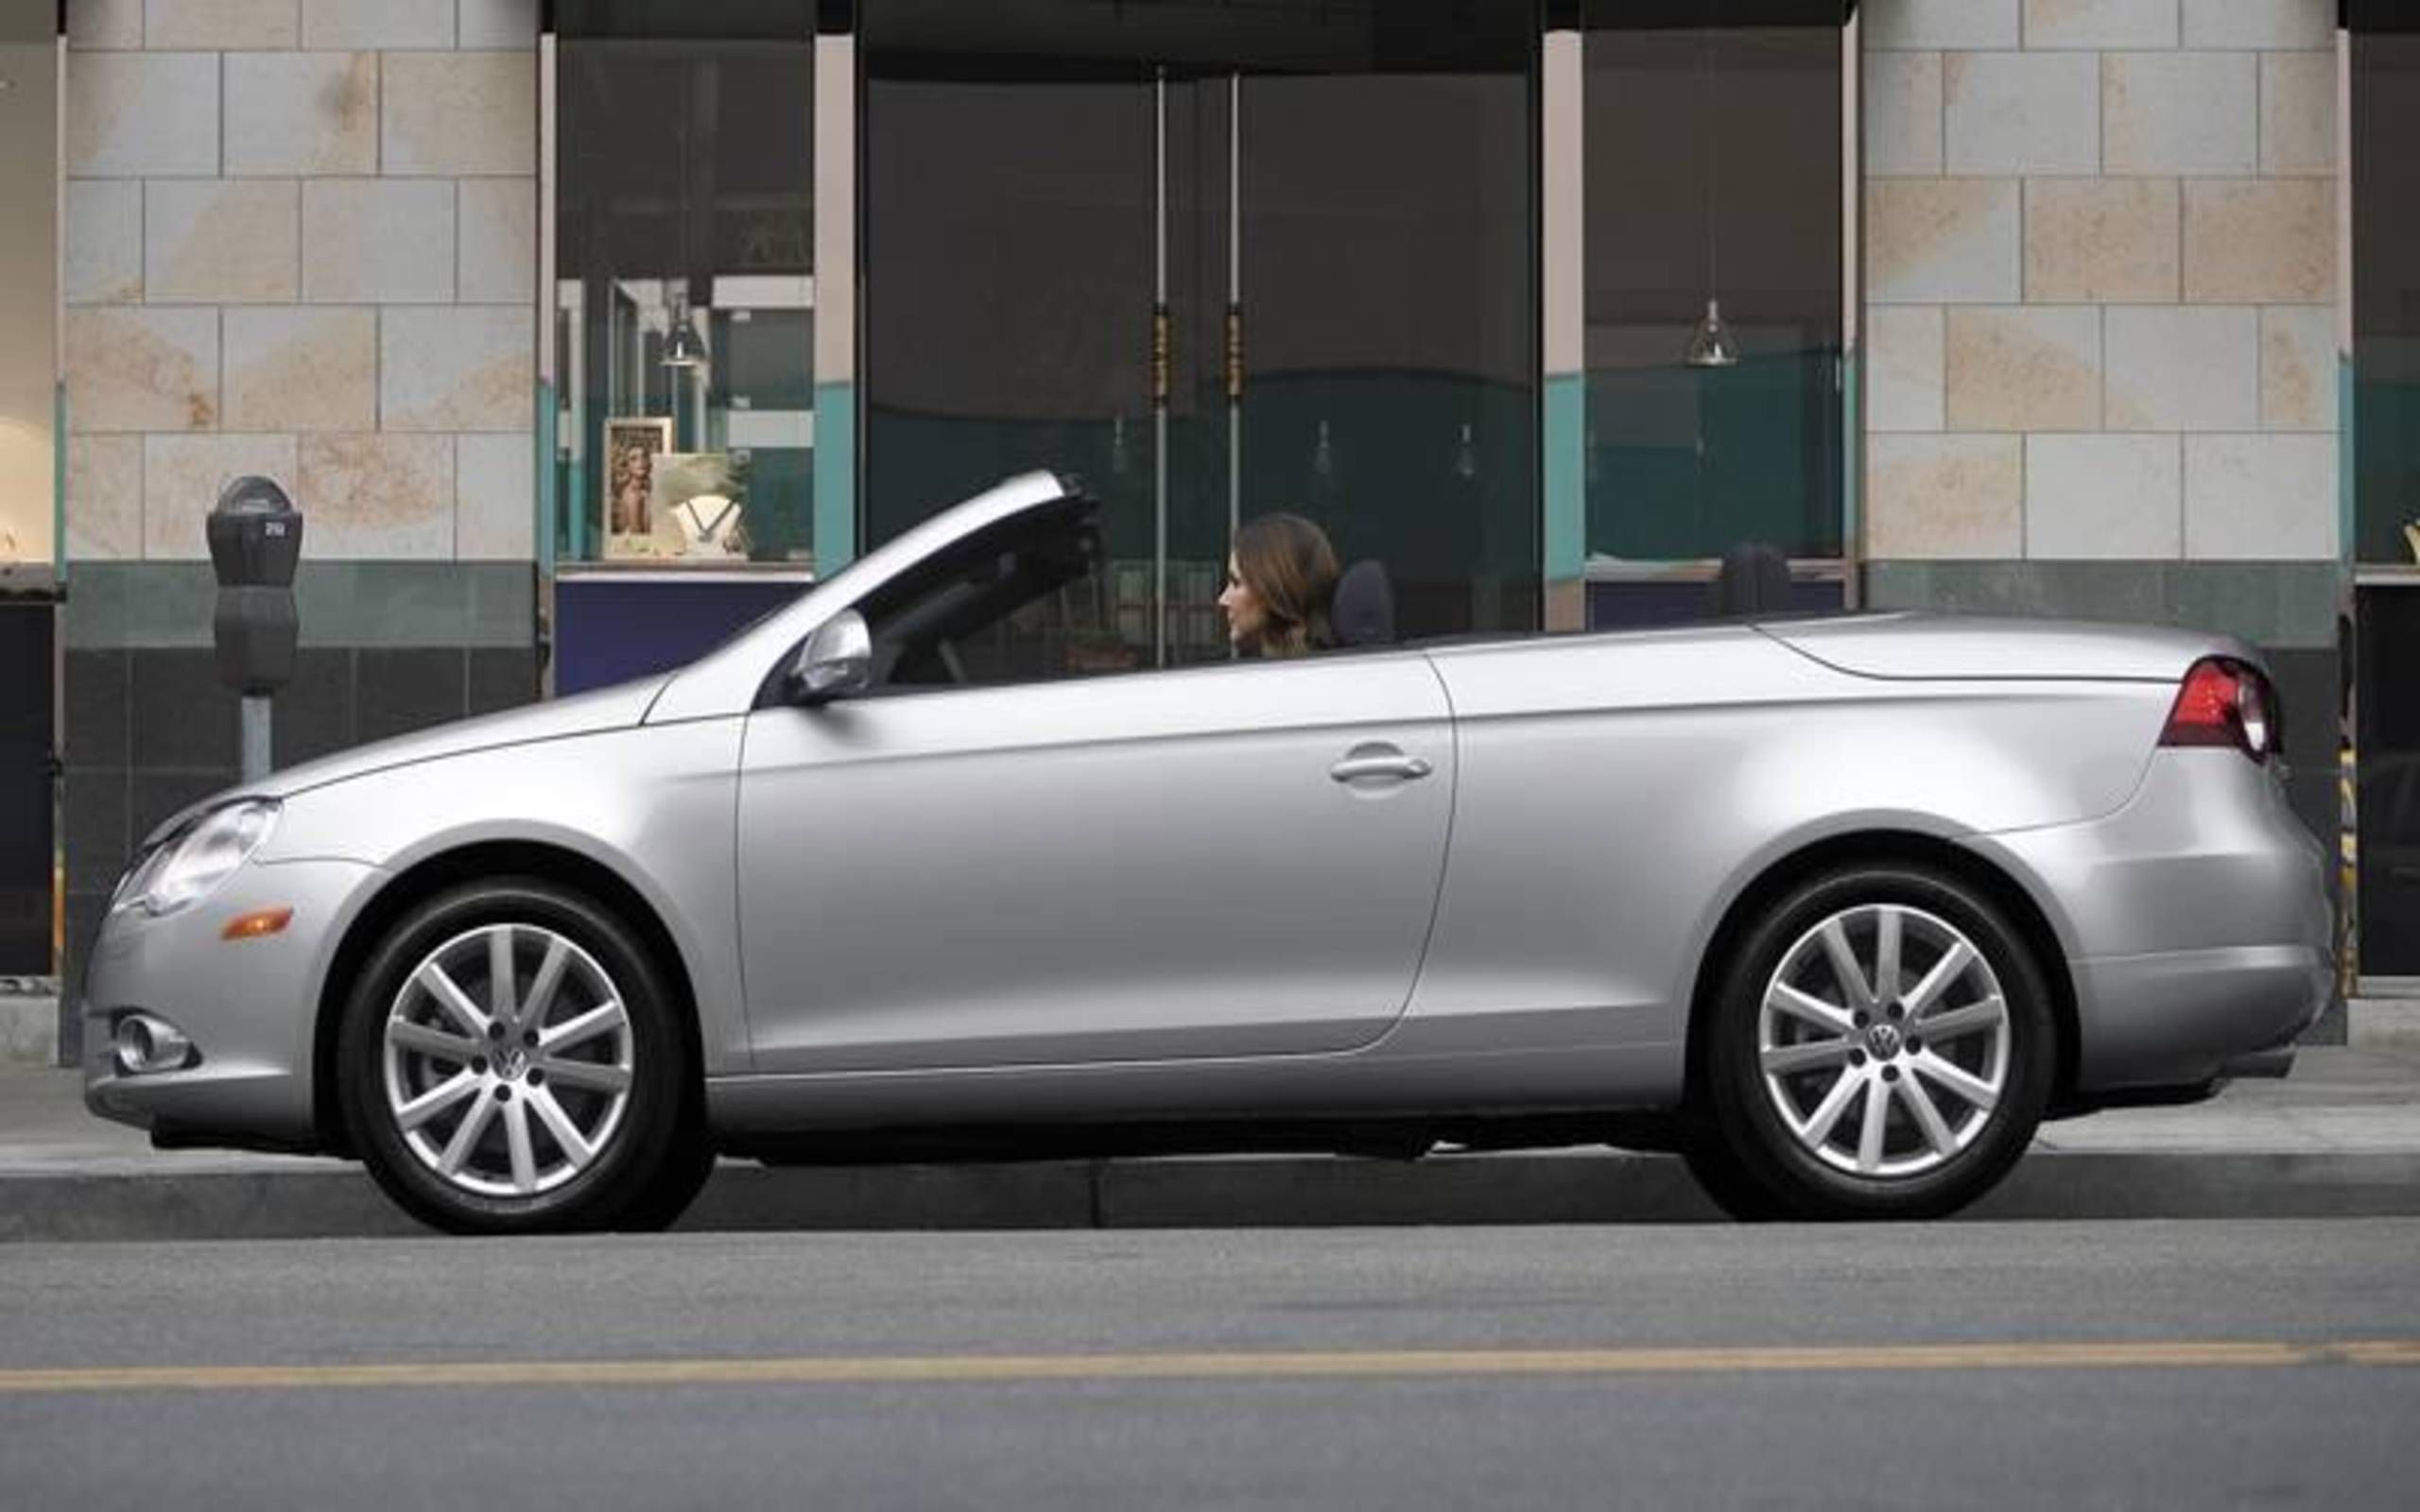 Red-Hot Drop-Top: VW offers retractable hard top for under $30,000